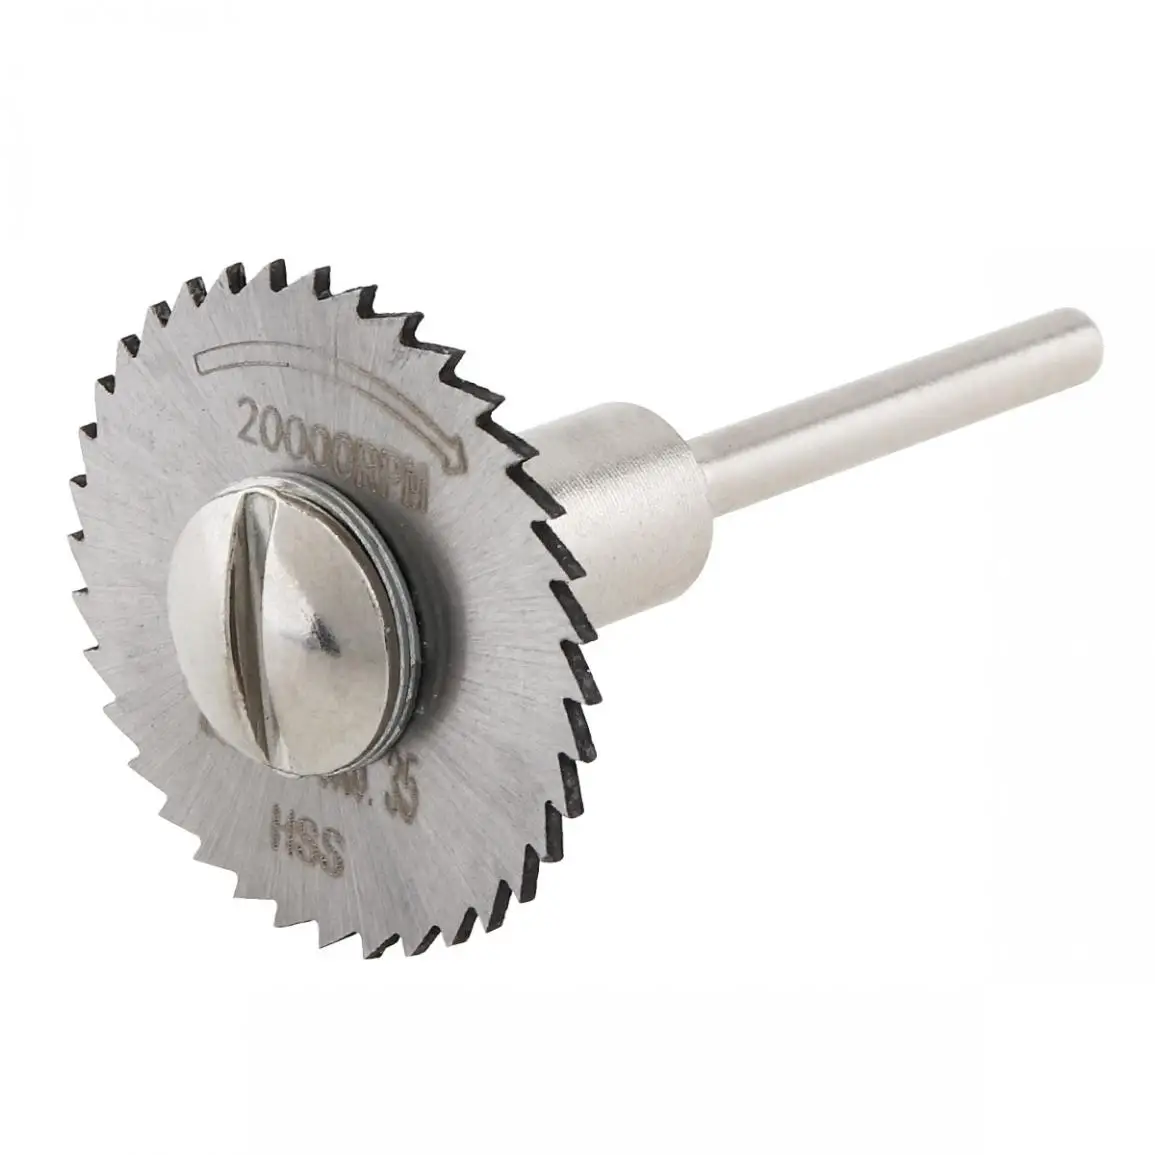 

22mm 25mm 32mm HSS High Speed Steel Mini Circular Saw Blade Cutting Tool Mandrel Disc Blade with Connecting Rod